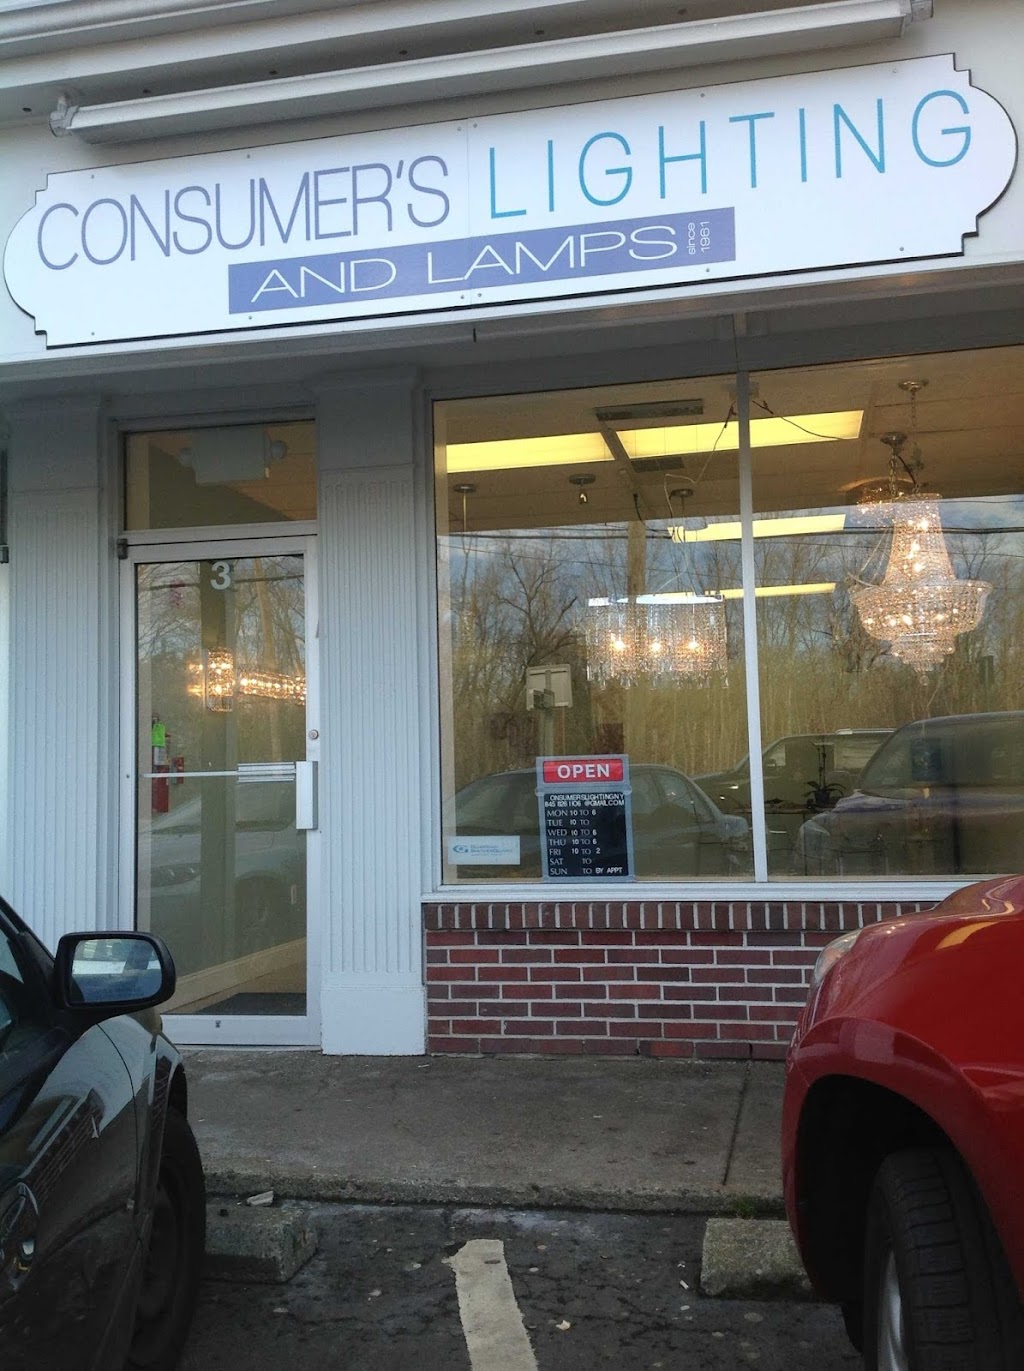 Consumers Lighting And Lamps | 23 Washington Ave, Suffern, NY 10901 | Phone: (845) 533-1622